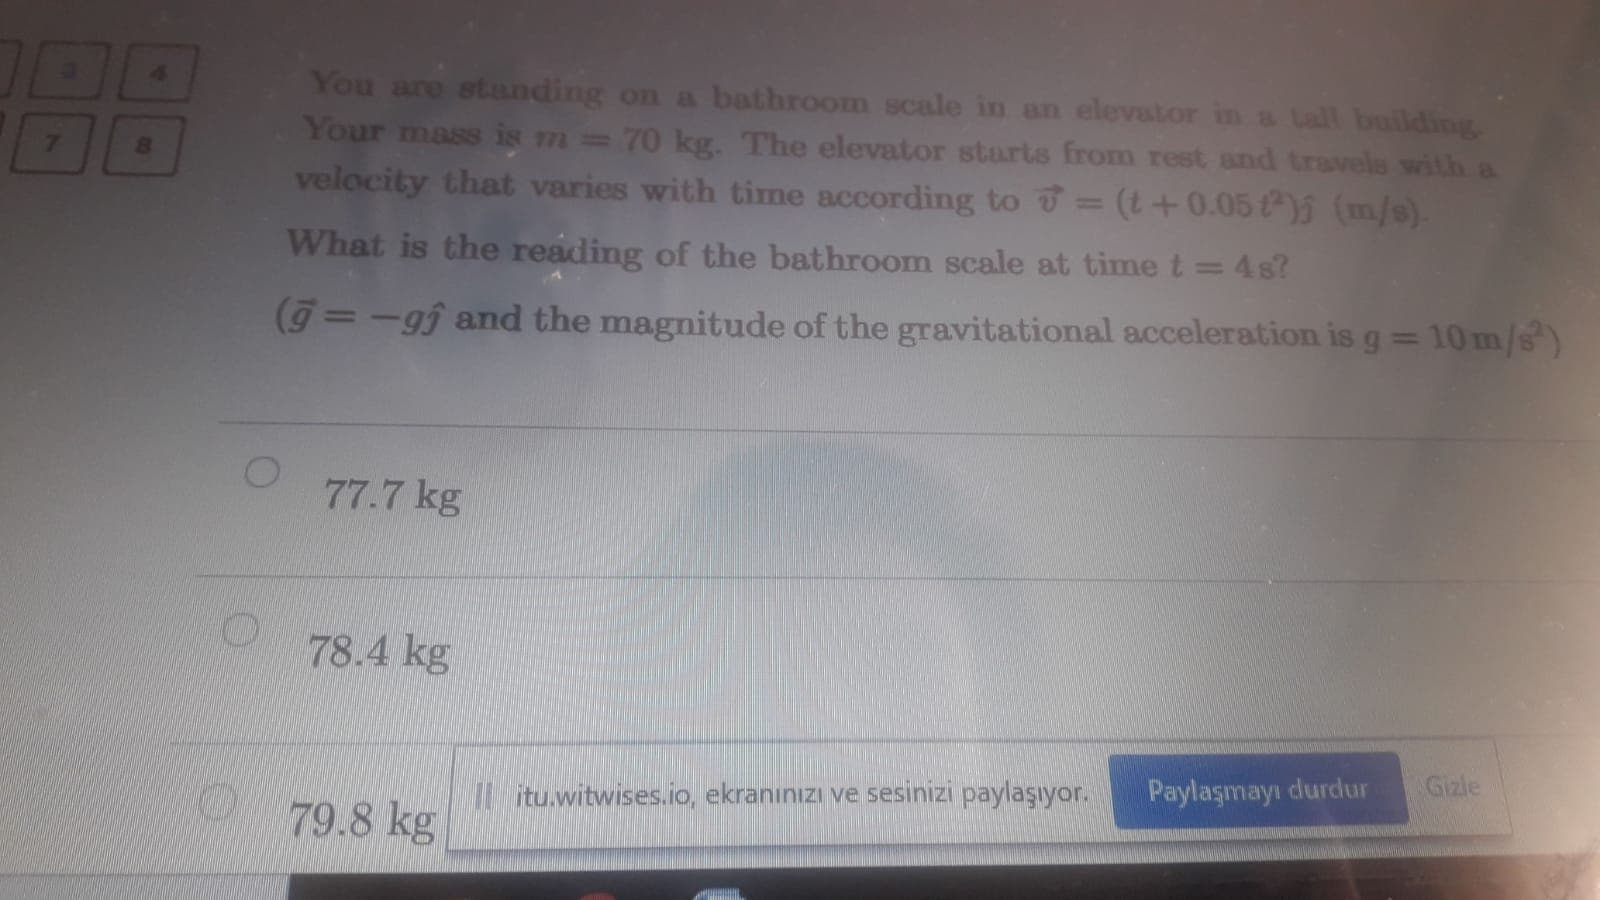 You are standing on a bathroom scale in an elevator in a tall buildingg
Your mass is m=70 kg. The elevator starts from rest and travels with a
velocity that varies with time according to = (t+0.05 ) (m/s).
What is the reading of the bathroom scale at time t = 4s?
%3D
(g=-gj and the magnitude of the gravitational acceleration is g = 10 m/s)
